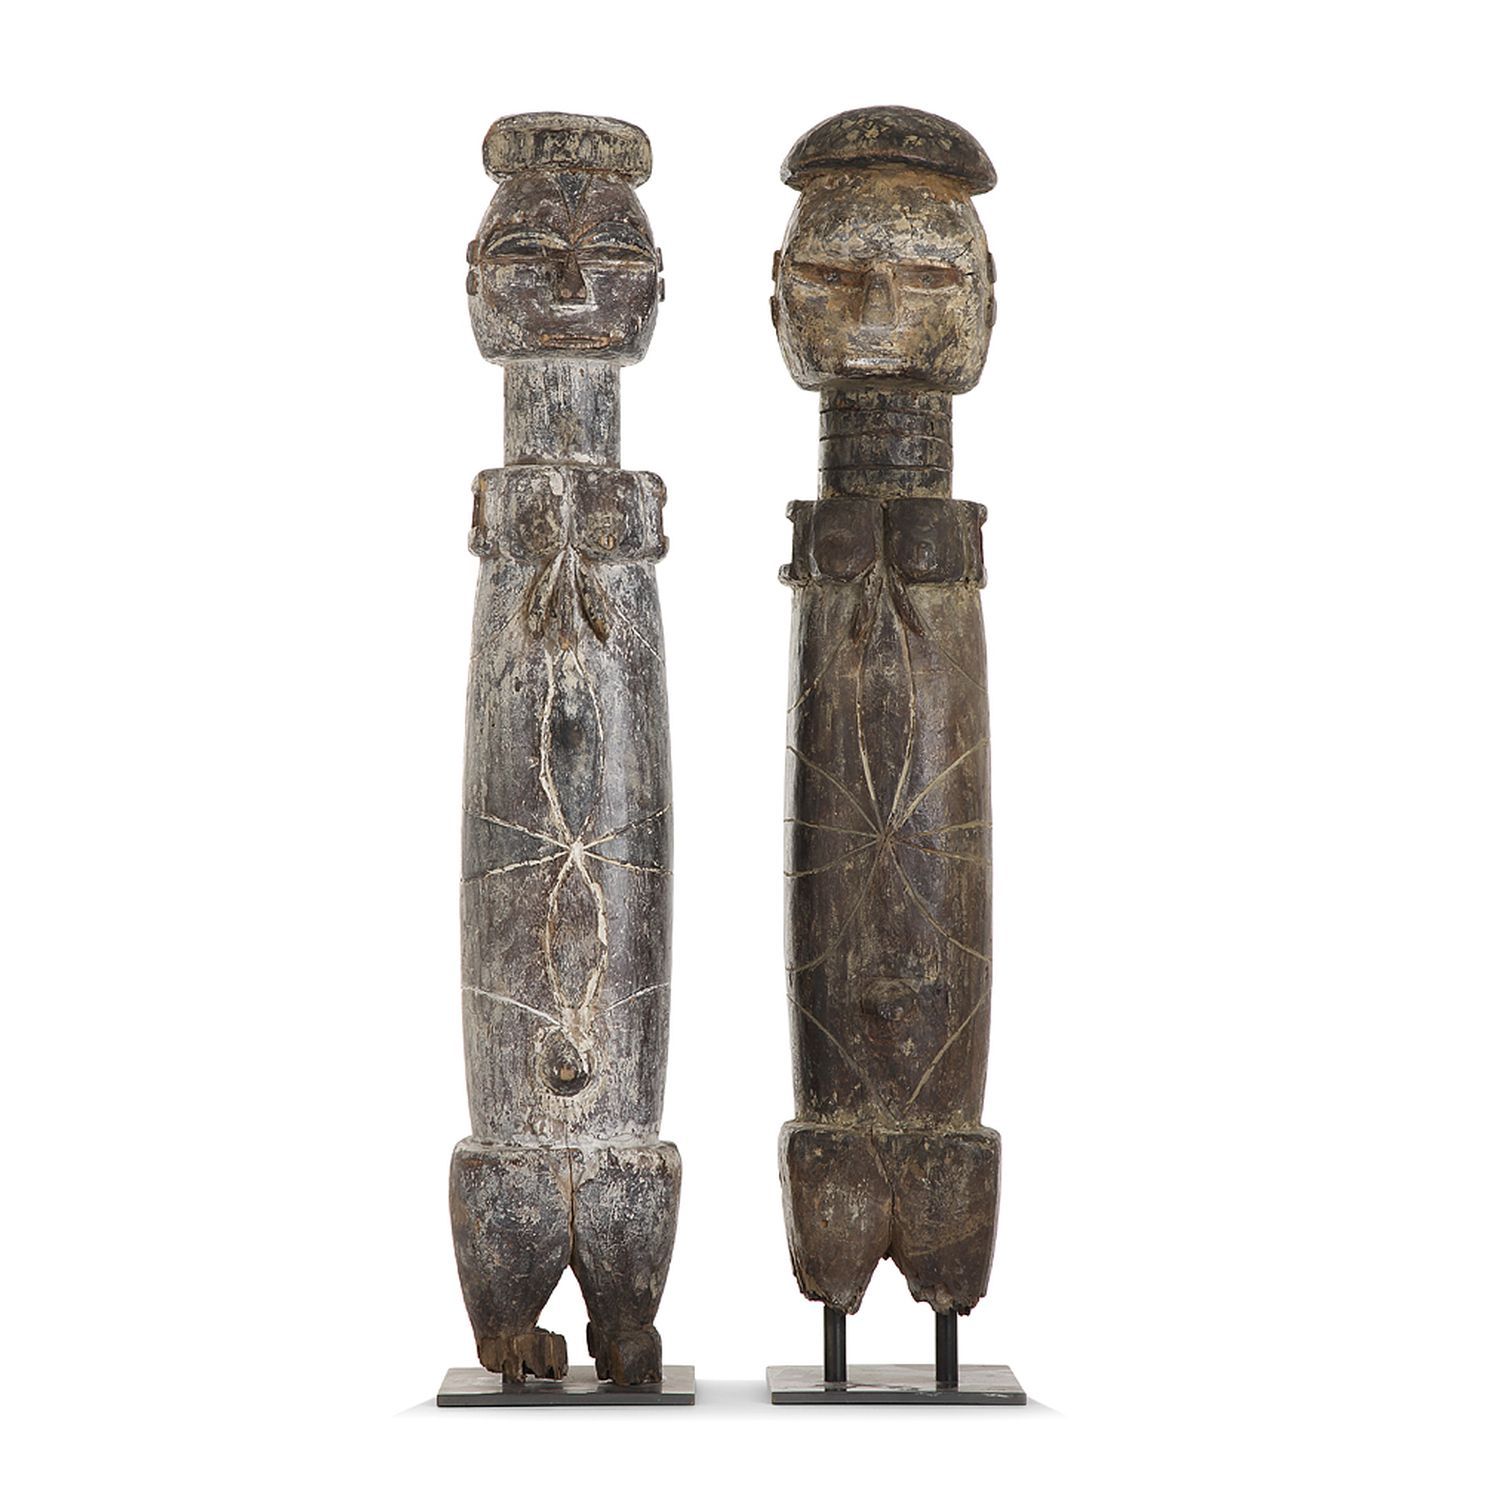 Null PAIR OF IBIBIO PUPPETS, EKET, NIGERIA
wood with crusty patina, pigments 
(M&hellip;